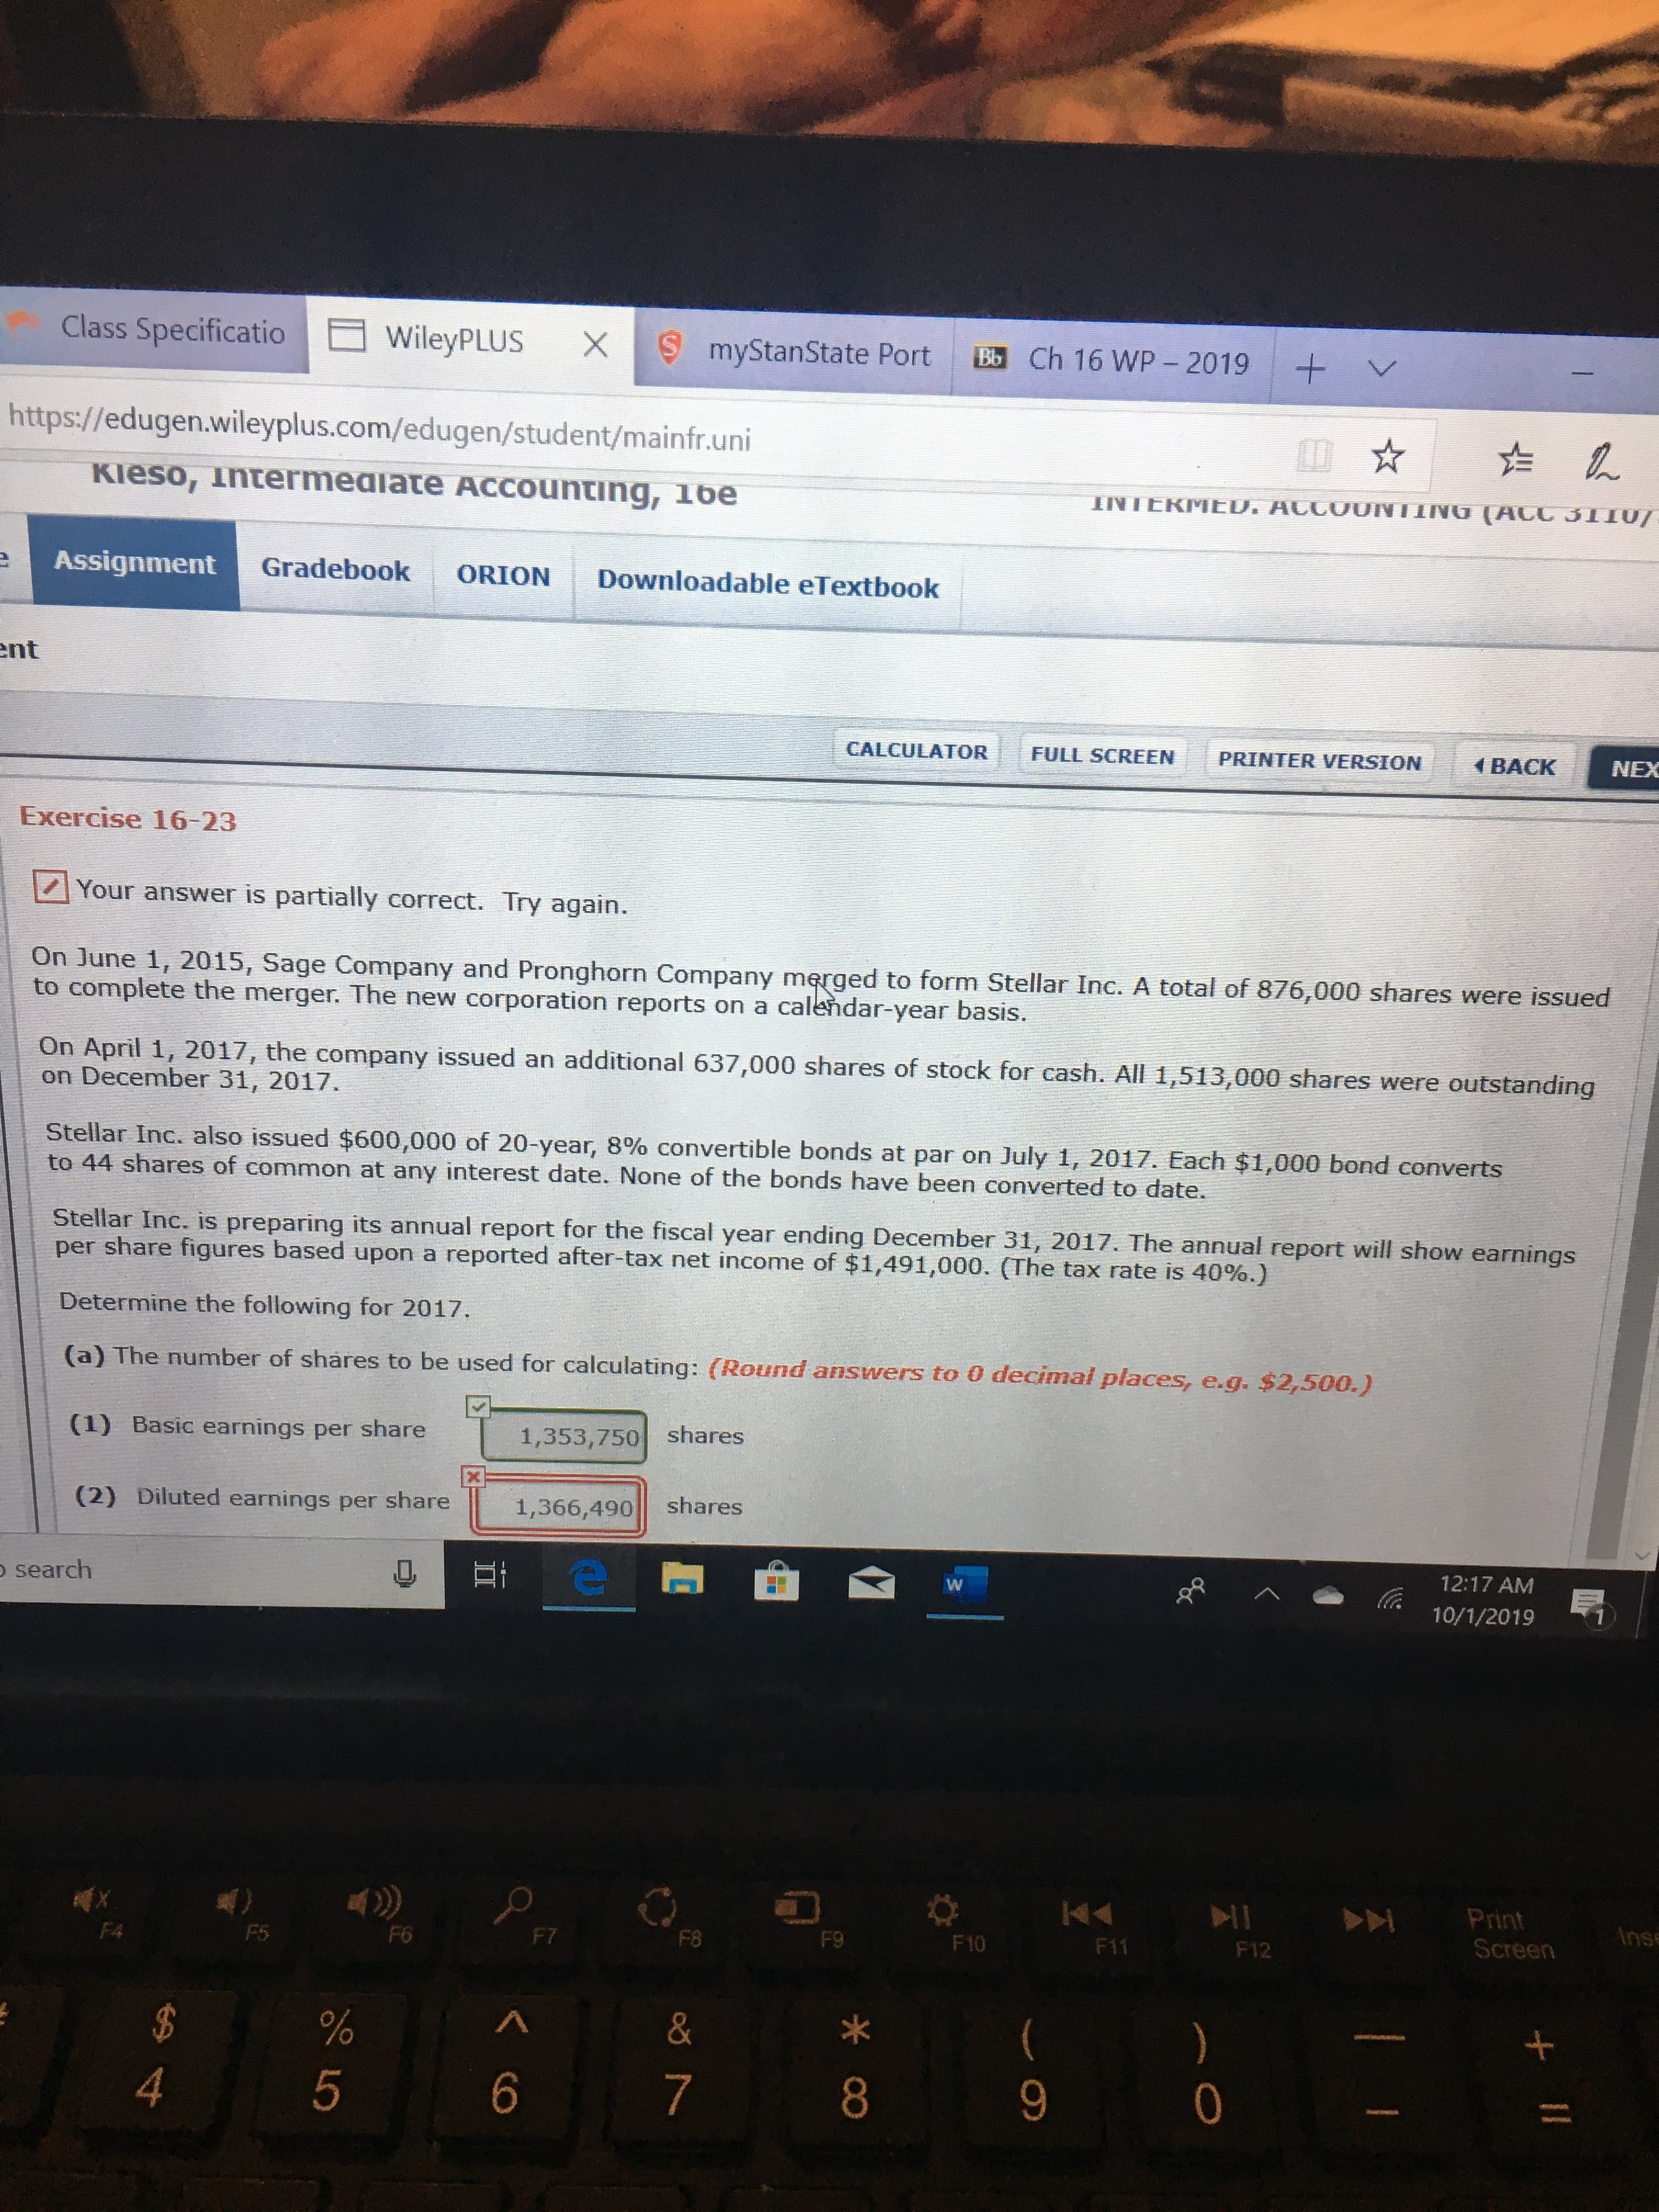 Class Specificatio
WileyPLUS
X
myStanState Port
Bb Ch 16 WP - 2019
+
L-
https://edugen.wileyplus.com/edugen/student/mainfr.uni
Kieso, intermeaiate ACCounting, 16e
INTERMED. ACCOUNTING (ACC 31I0/-
Assignment
Gradebook
ORION
Downloadable eTextbook
nt
CALCULATOR
FULL SCREEN
PRINTER VERSION
BACK
NEX
Exercise 16-23
Your answer is partially correct. Try again.
On June 1, 2015, Sage Company and Pronghorn Company merged to form Stellar Inc. A total of 876,000 shares were issued
to complete the merger. The new corporation reports on a calendar-year basis.
On April 1, 2017, the company issued an additional 637,000 shares of stock for cash. All 1,513,000 shares were outstanding
on December 31, 2017.
Stellar Inc. also issued $600,000 of 20-year, 8% convertible bonds at par on July 1, 2017. Each $1,000 bond converts
to 44 shares of common at any interest date. None of the bonds have been converted to date.
Stellar Inc. is preparing its annual report for the fiscal year ending December 31, 2017. The annual report will show earnings
per share figures based upon a reported after-tax net income of $1,491,000. (The tax rate is 40%. )
Determine the following for 2017.
(a) The number of shares to be used for calculating: (Round answers to 0 decimal places, e.g. $2,500.)
(1) Basic earnings per share
1,353,750 shares
(2) Diluted earnings per share
1,366,490
shares
search
12:17 AM
10/1/2019
KA
Print
Screen
F4
F5
F6
F7
Anse
F8
F9
F10
F11
F12
&
)
0
4
6
7
8
9
II
రN
LO
